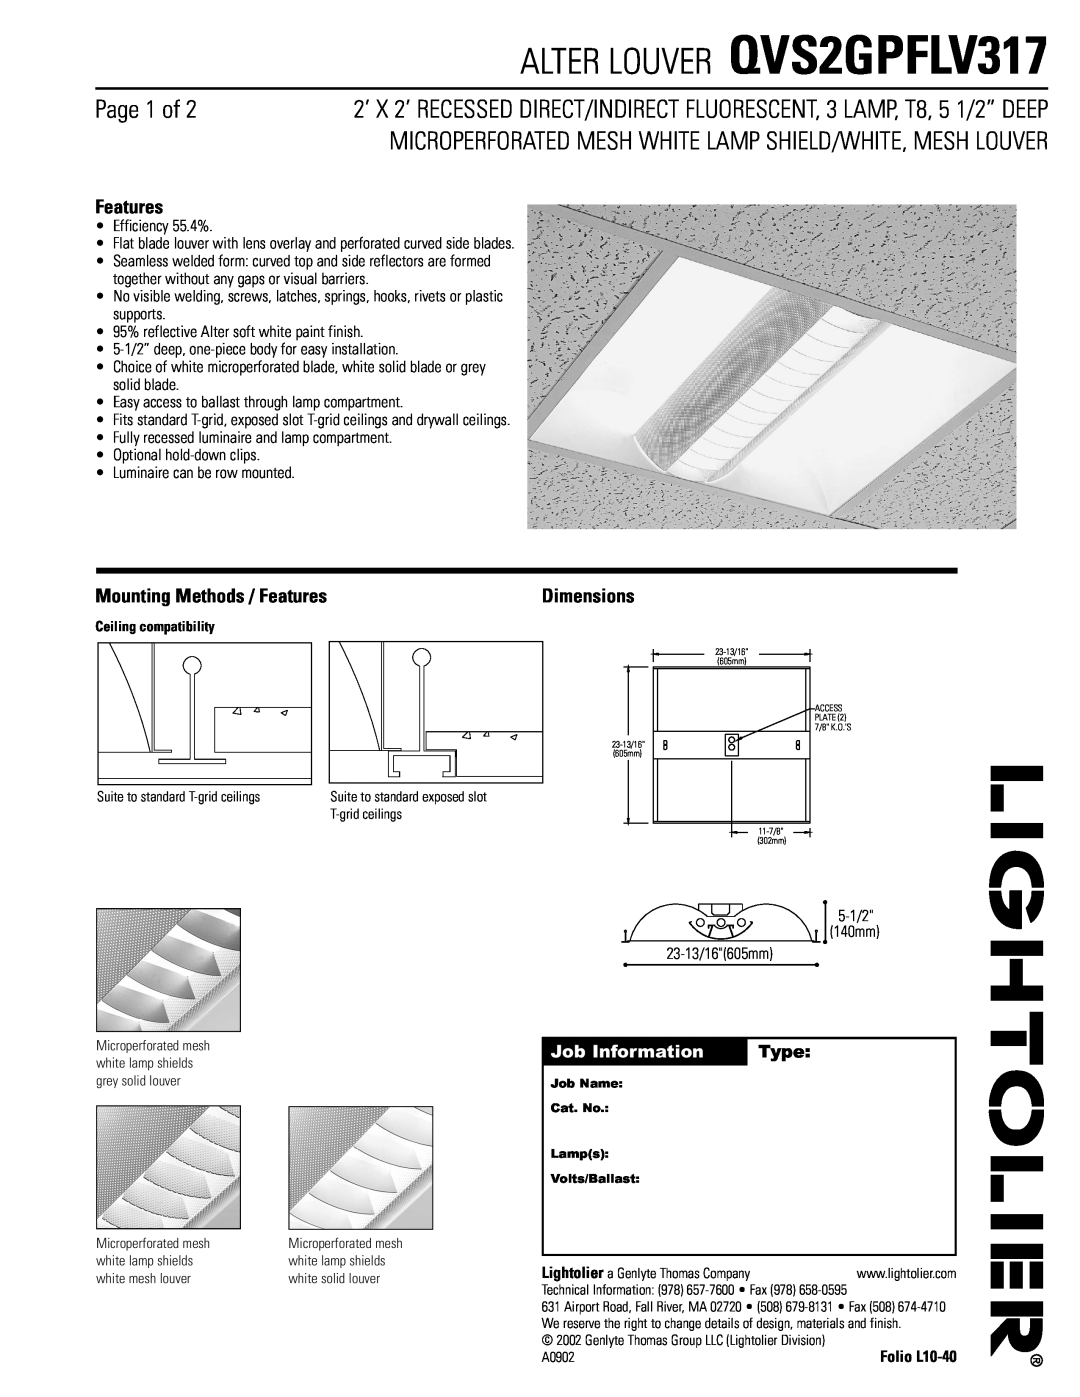 Lightolier dimensions ALTER LOUVER QVS2GPFLV317, Page 1 of, Mounting Methods / Features, Job Information, Type 